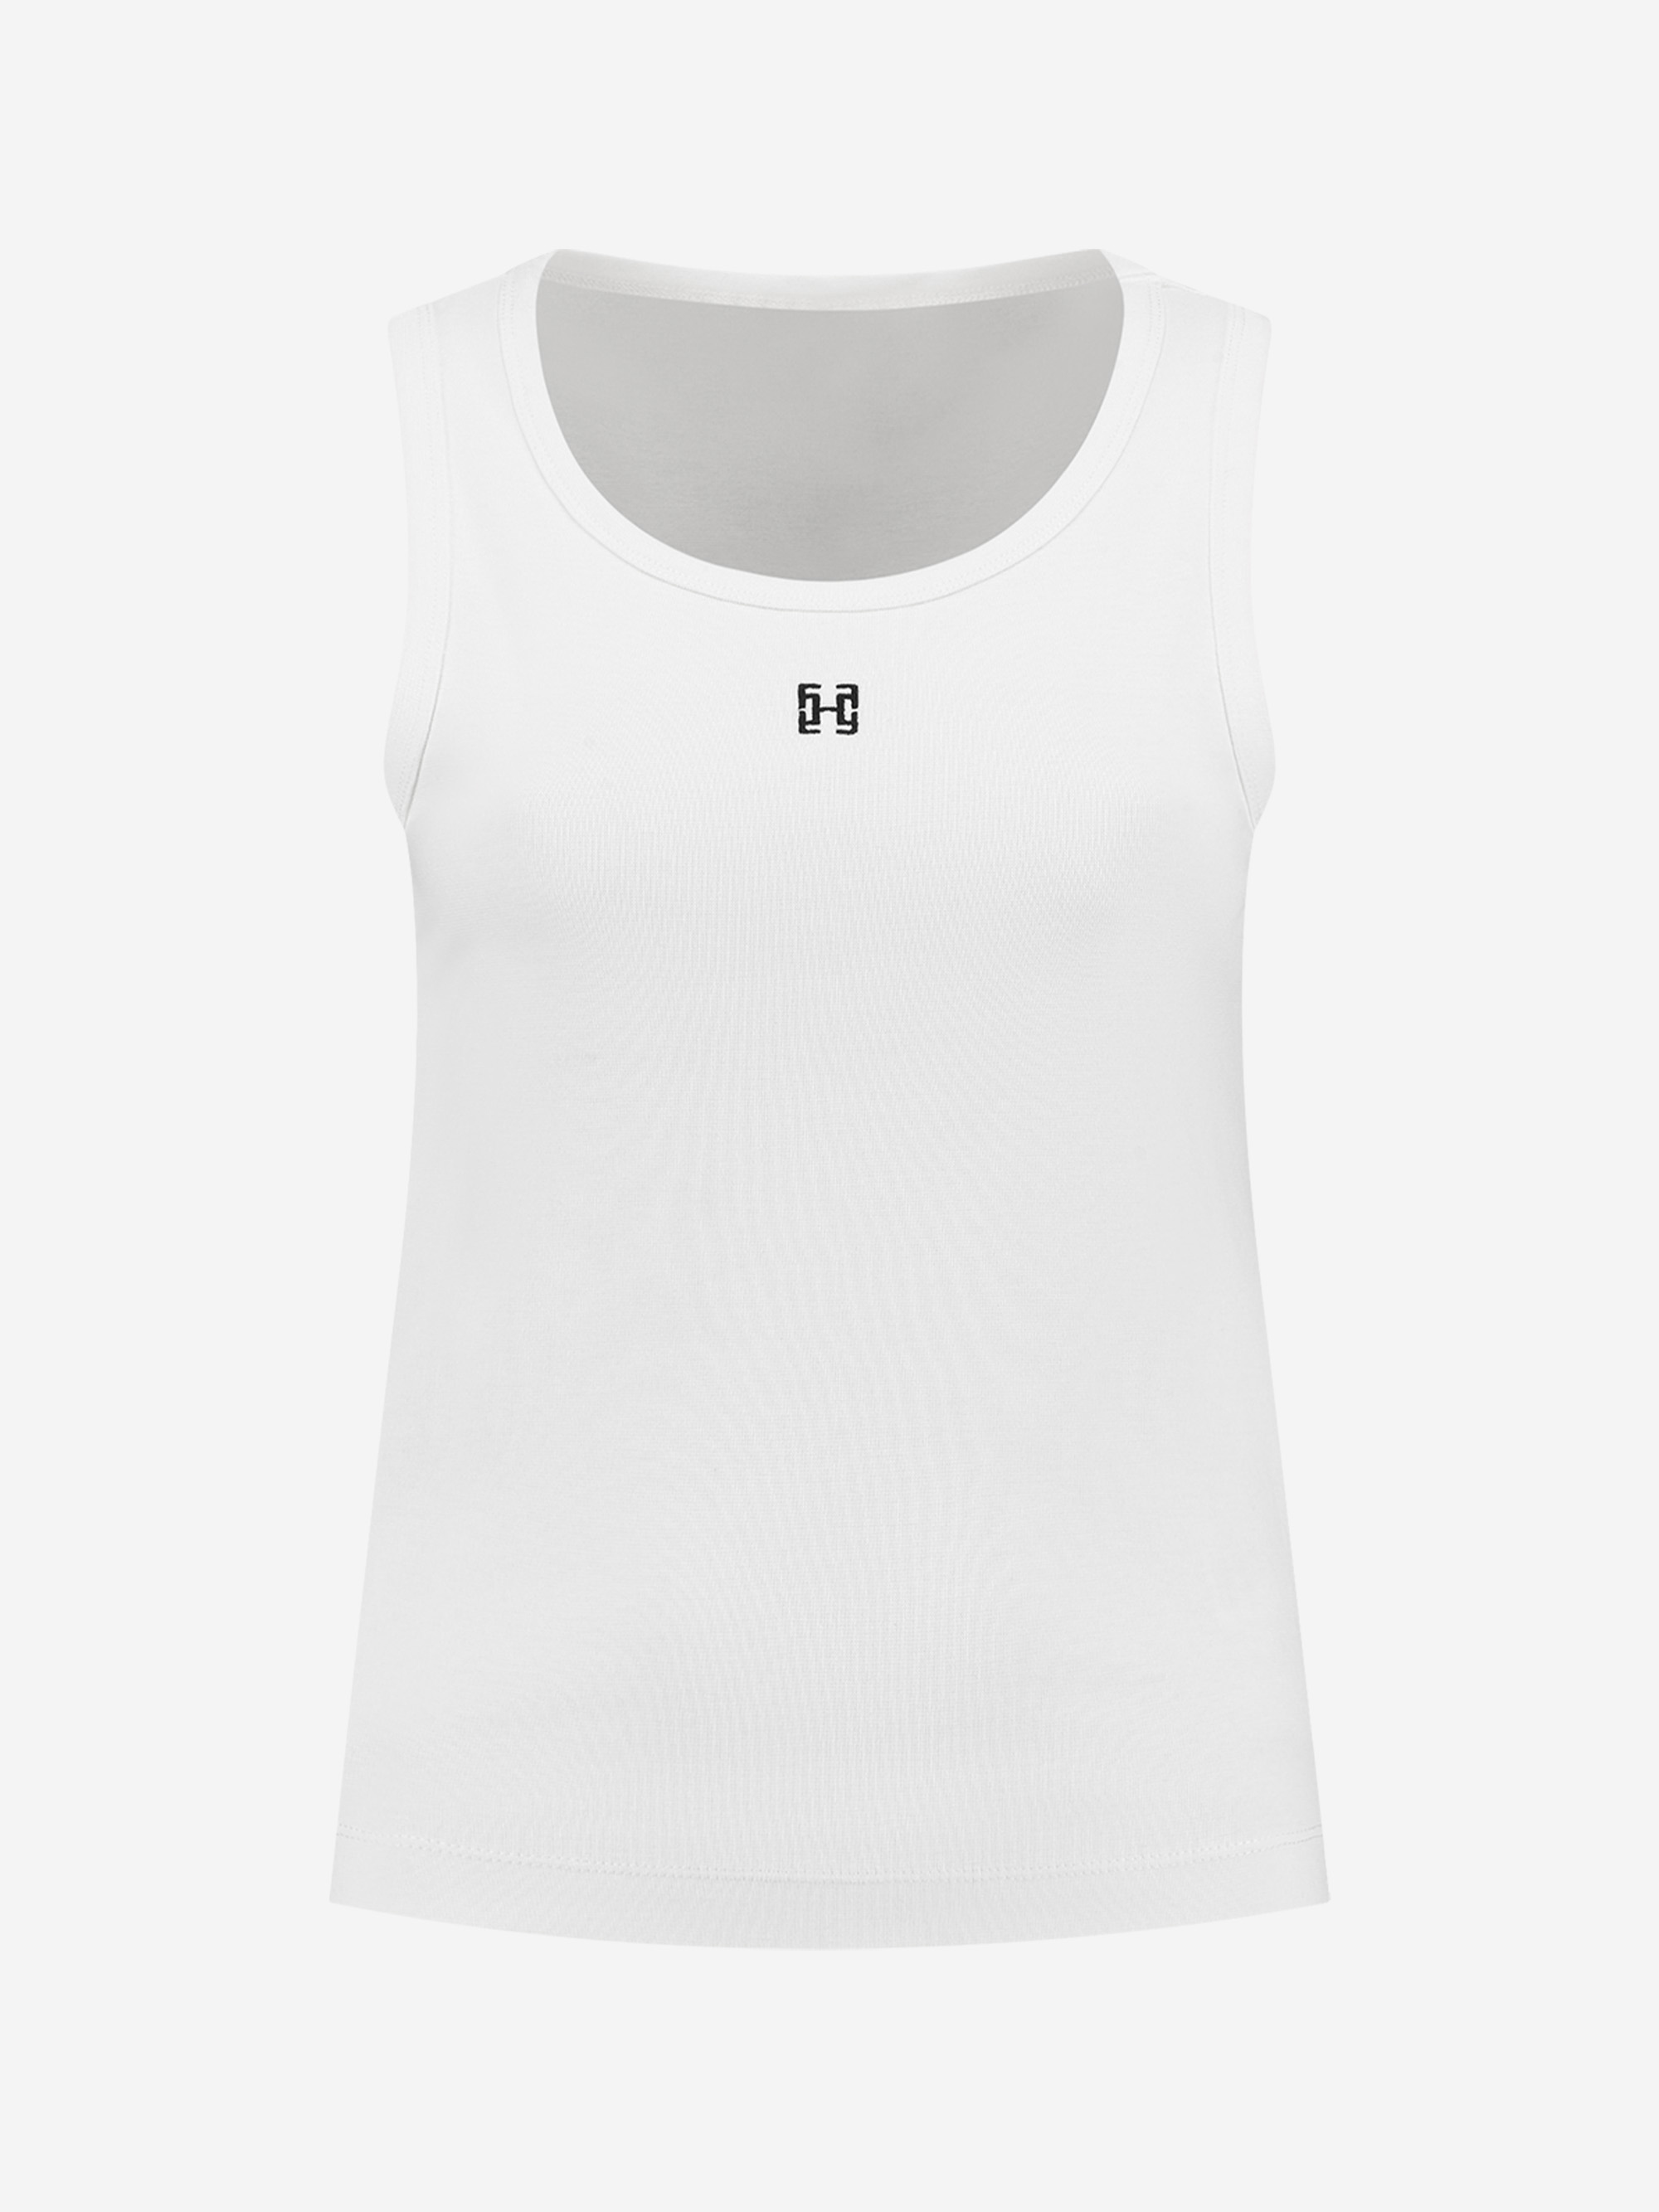 Tank top with FH logo